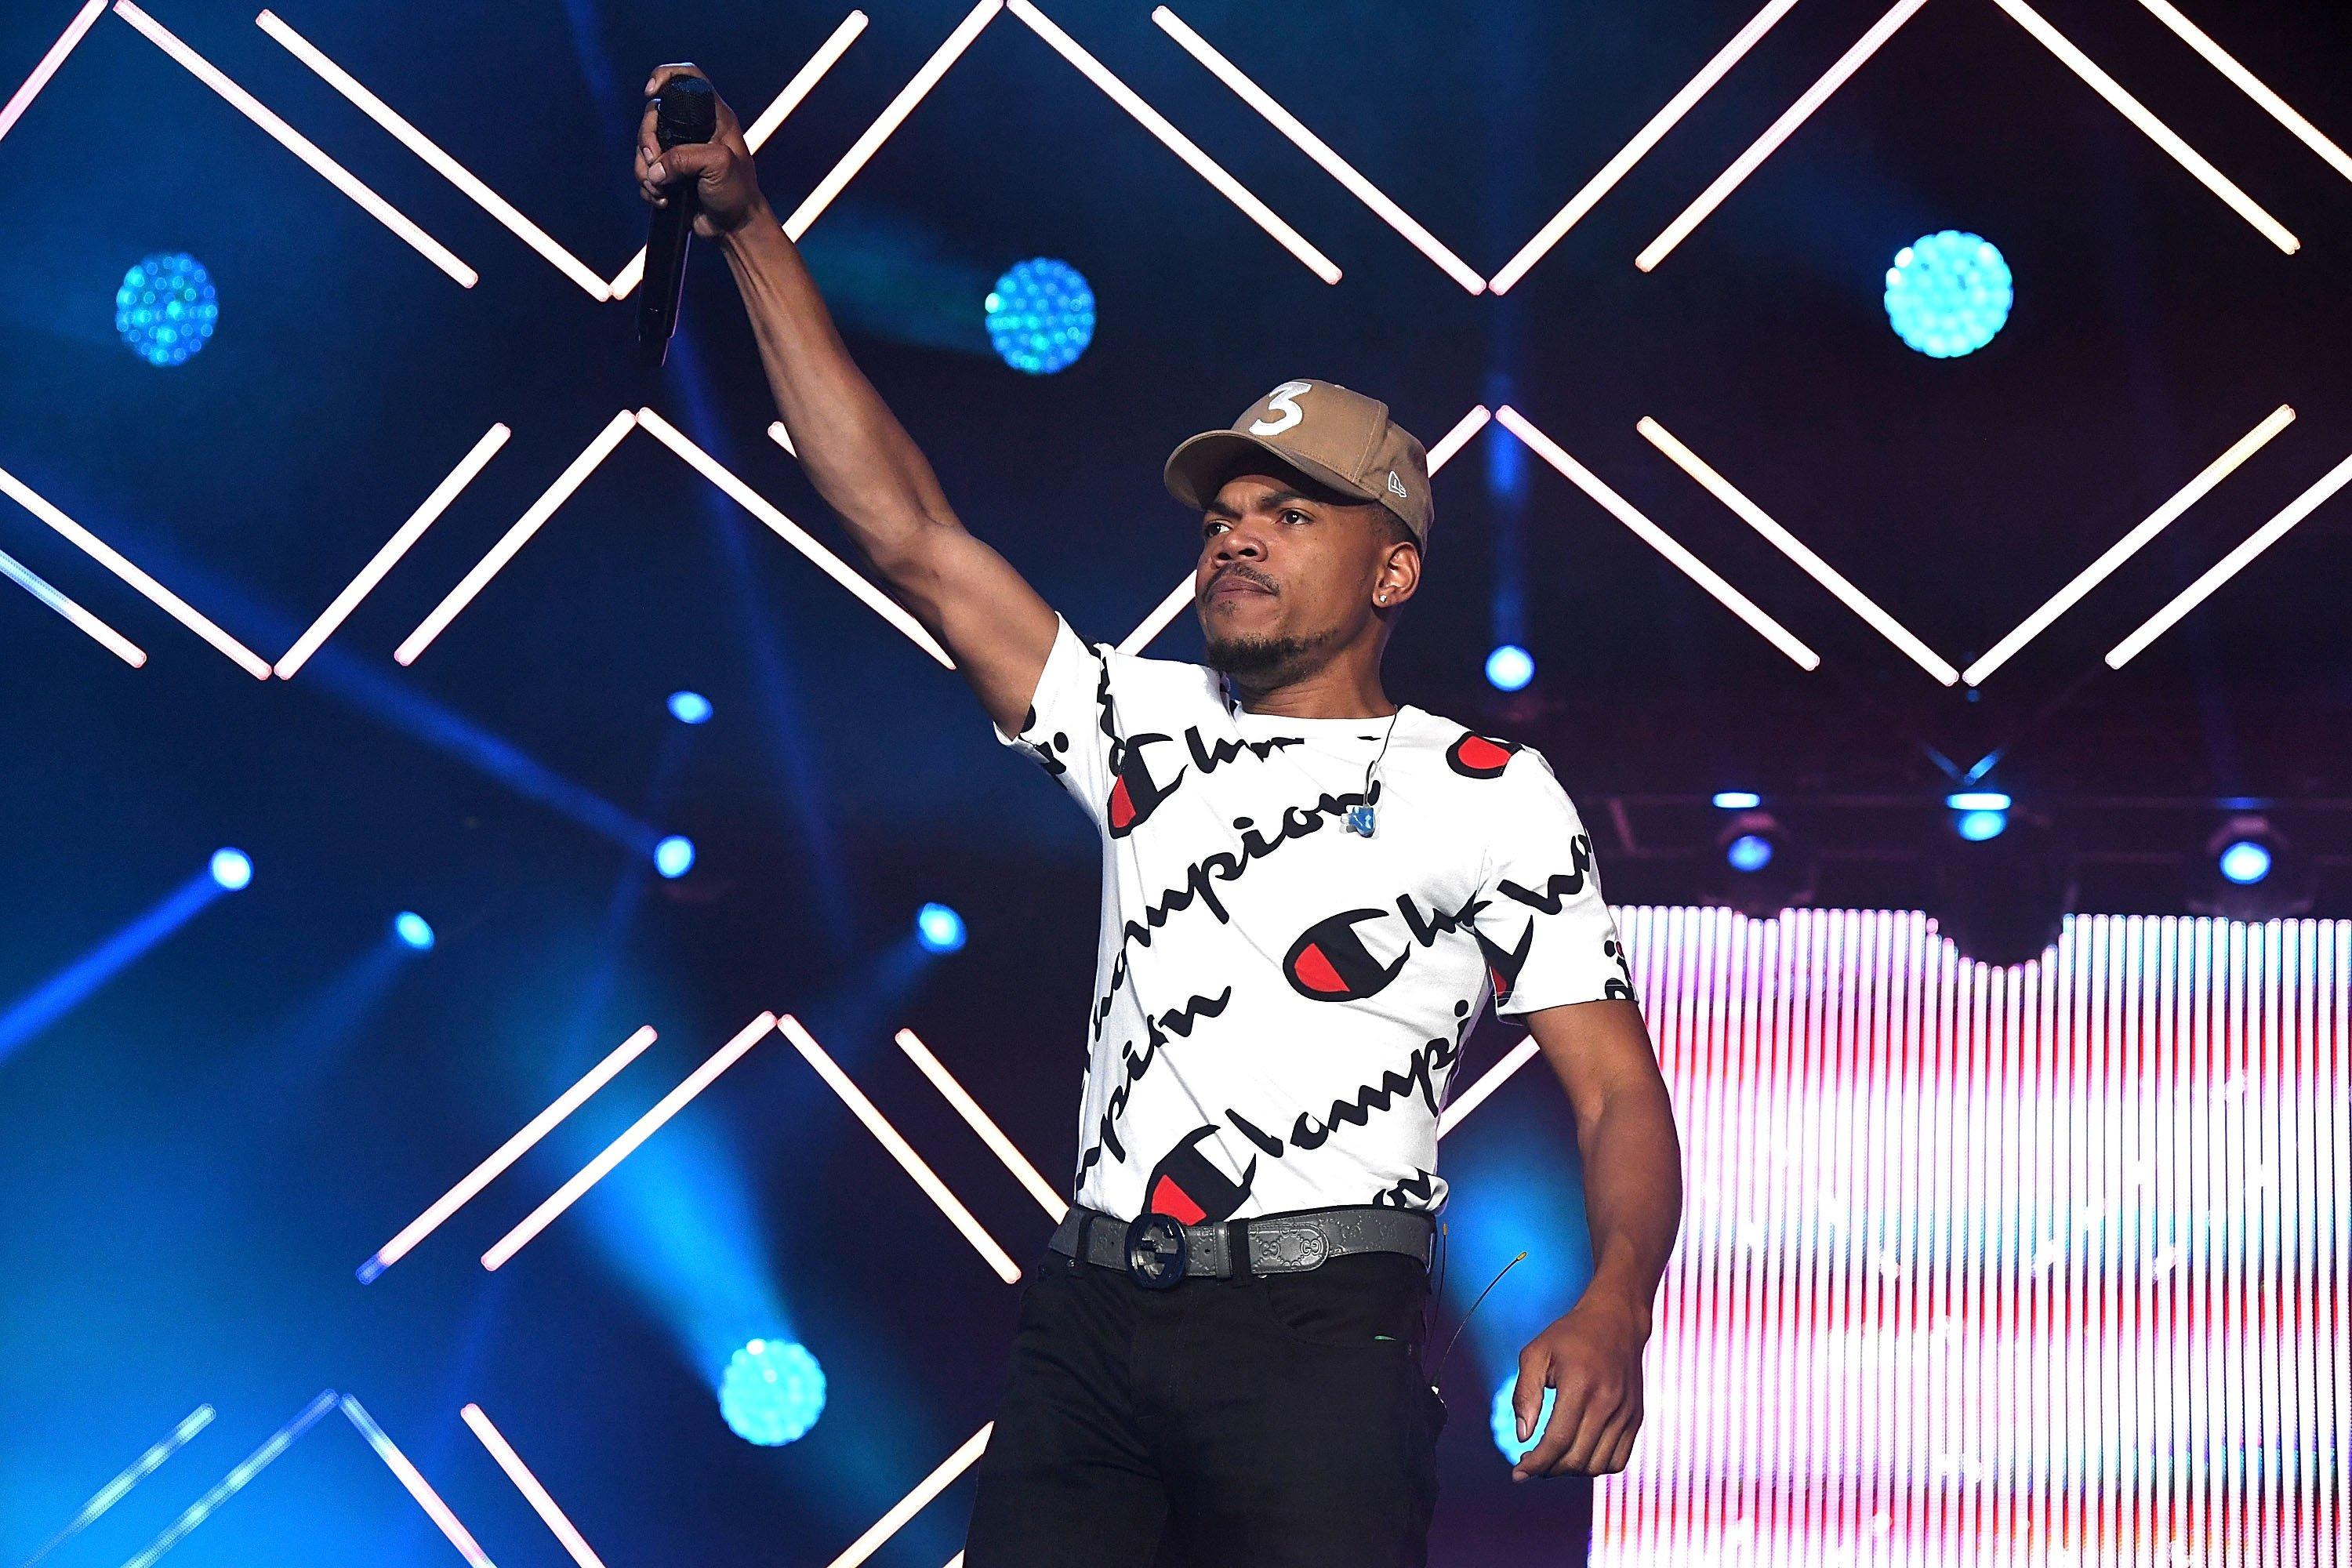 Chance The Rapper performs at Essence Festival 2017